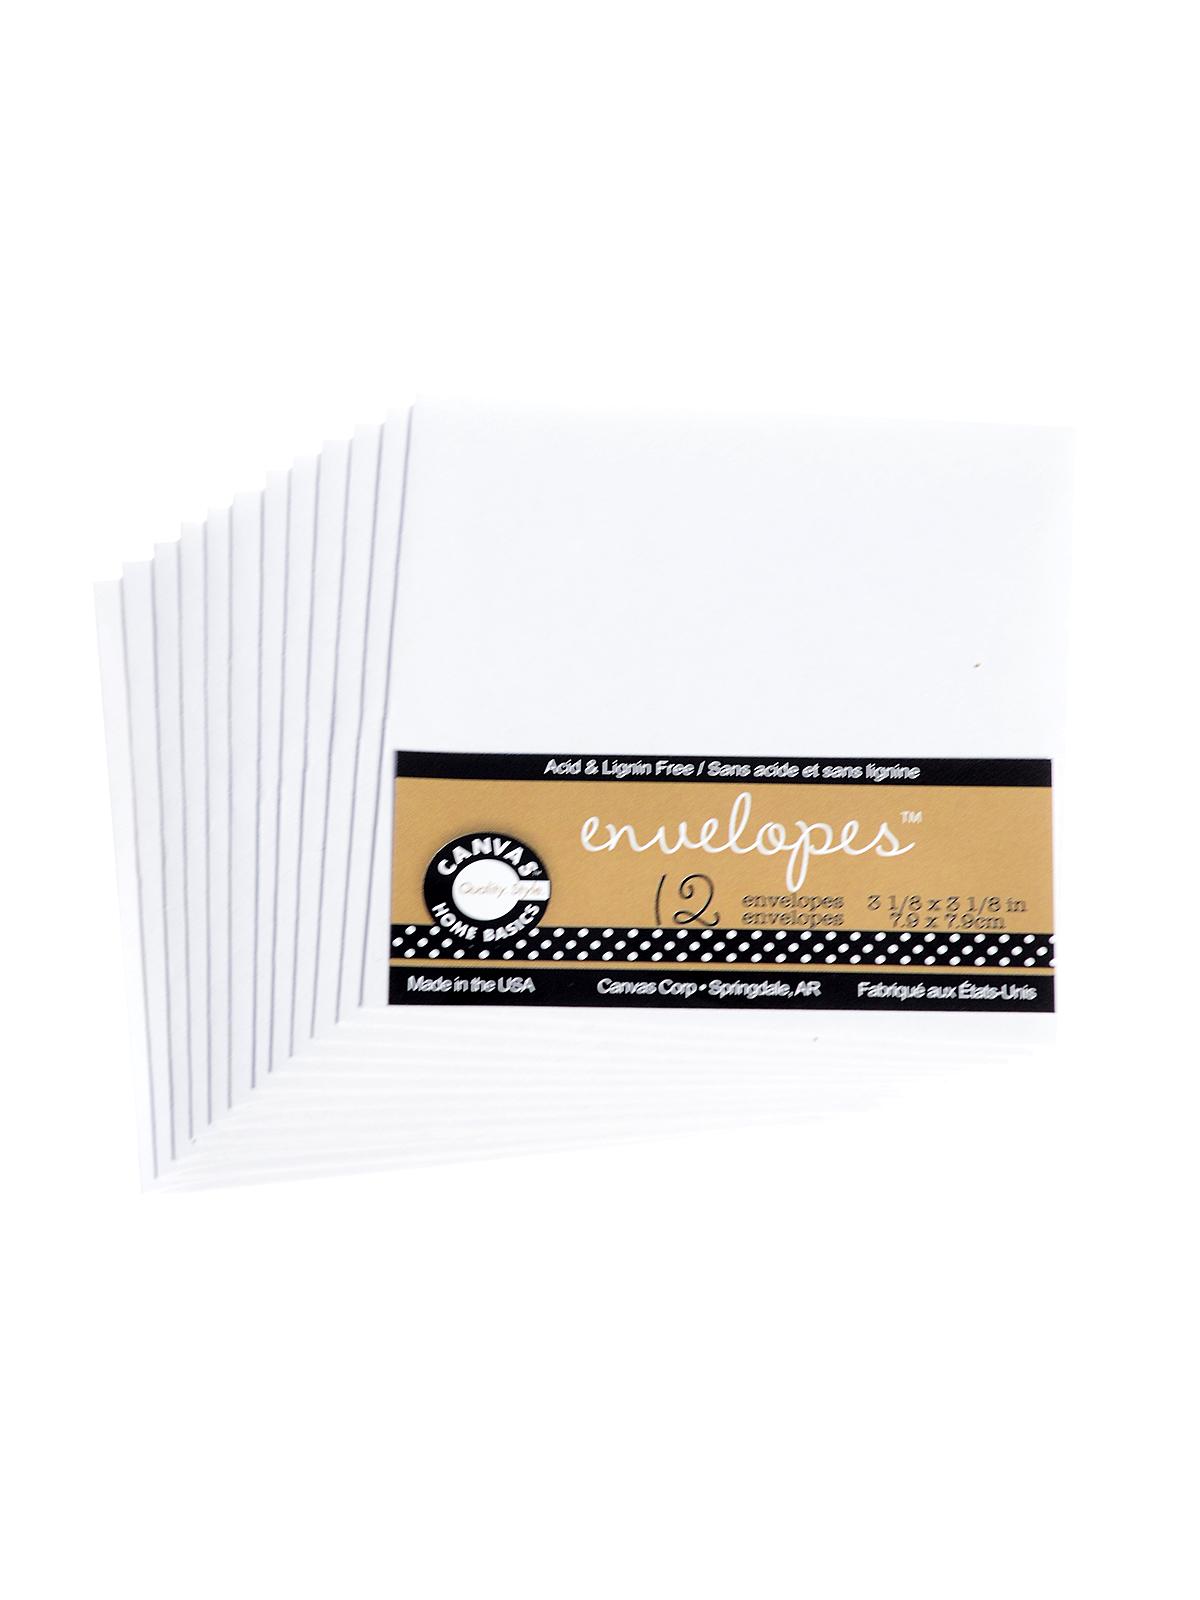 Packaged Cards And Envelopes Envelopes White 3 1 8 In. X 3 1 8 In. Pack Of 12